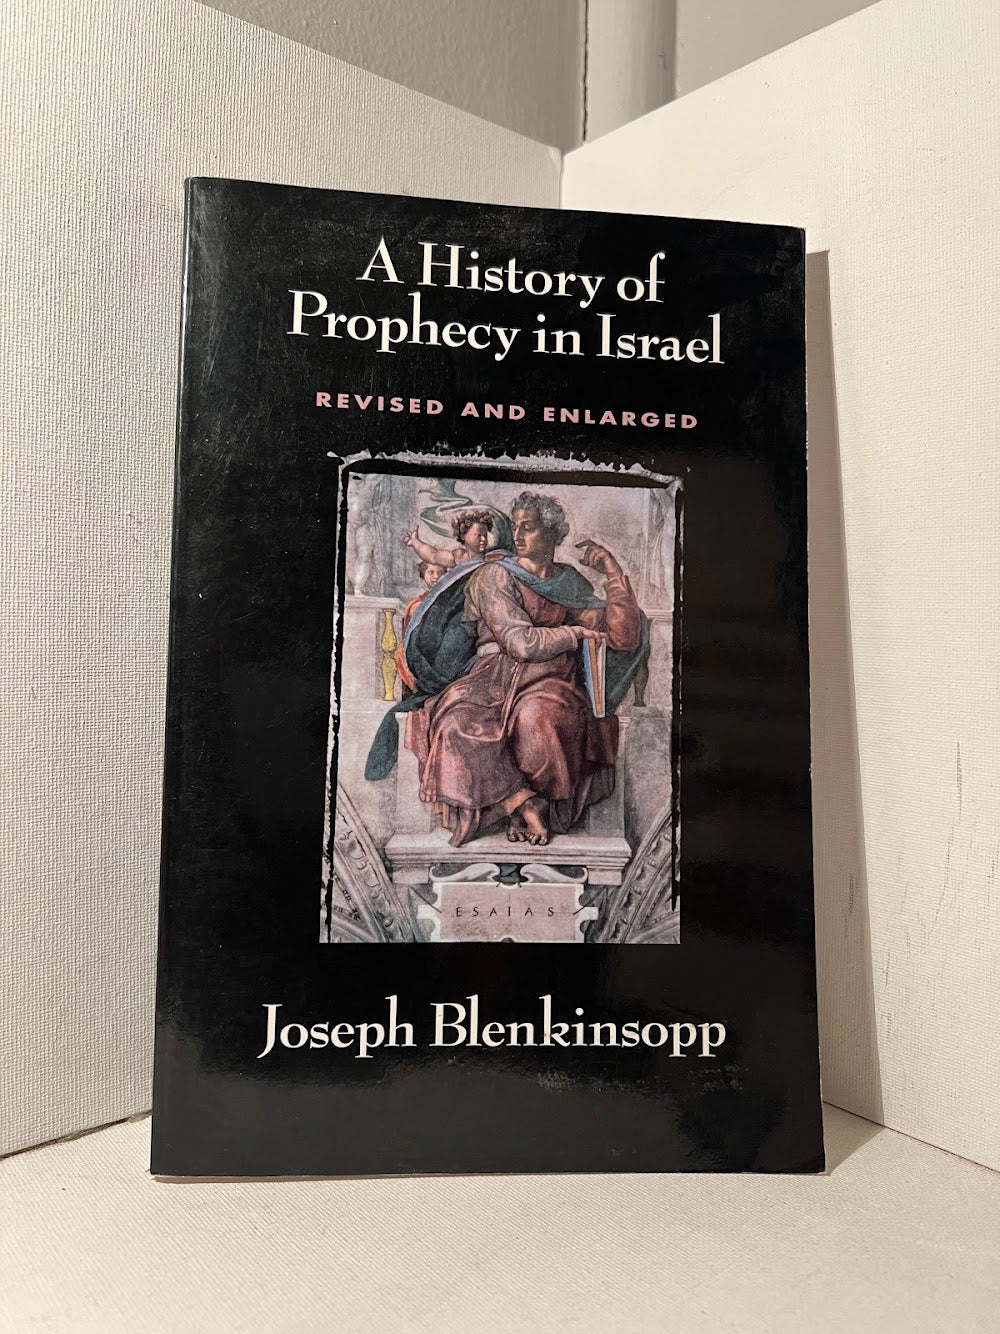 A History of Prophecy in Israel by Joseph Blenkinsopp